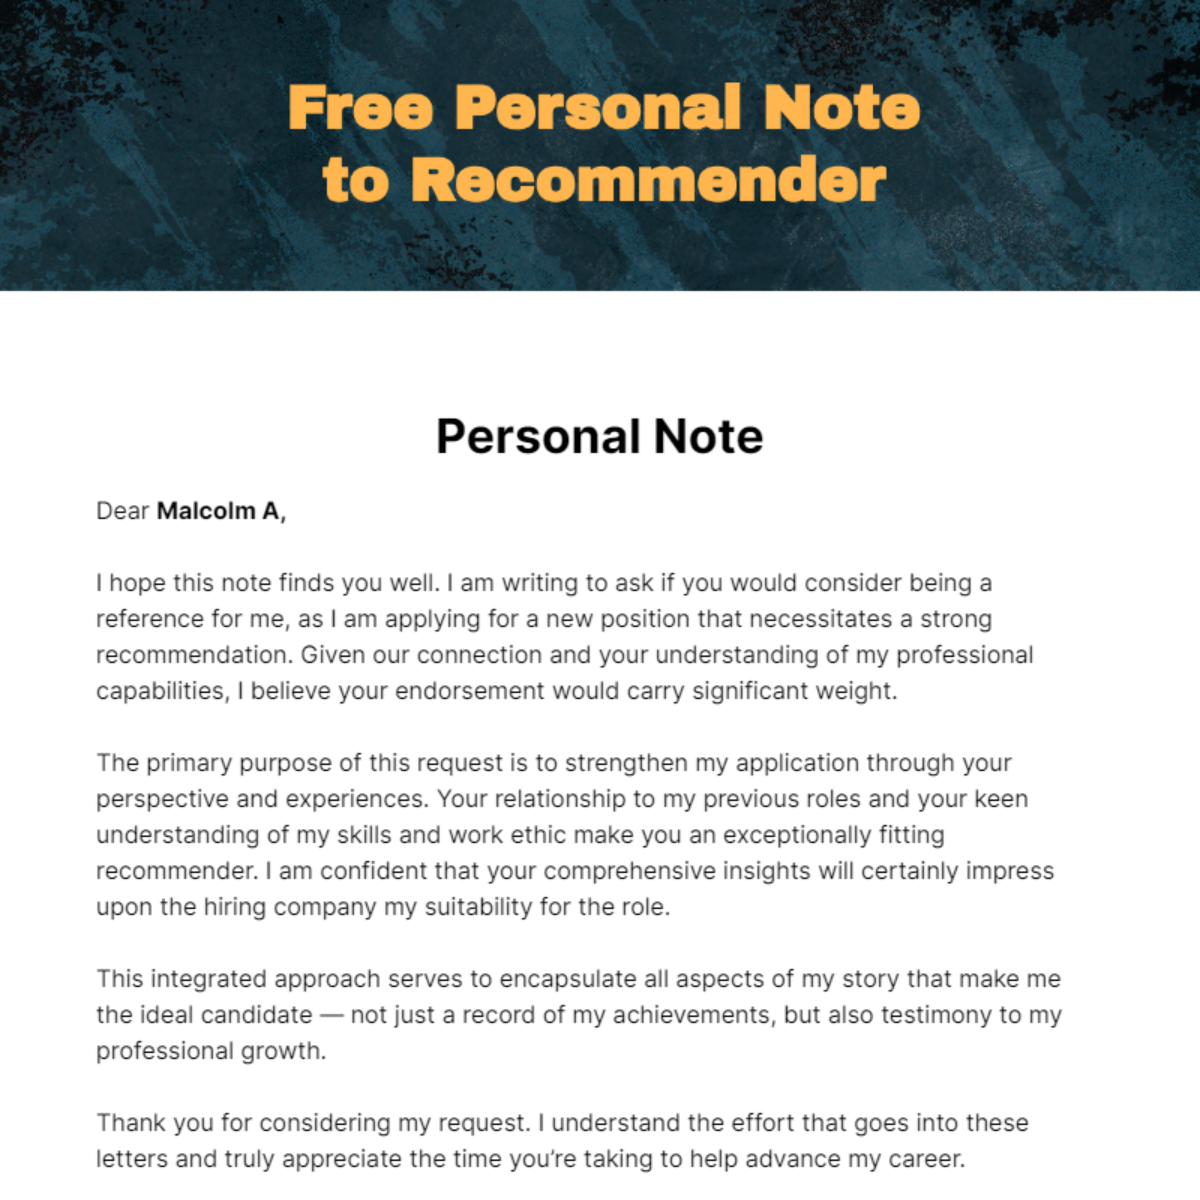 Personal Note to Recommender Template